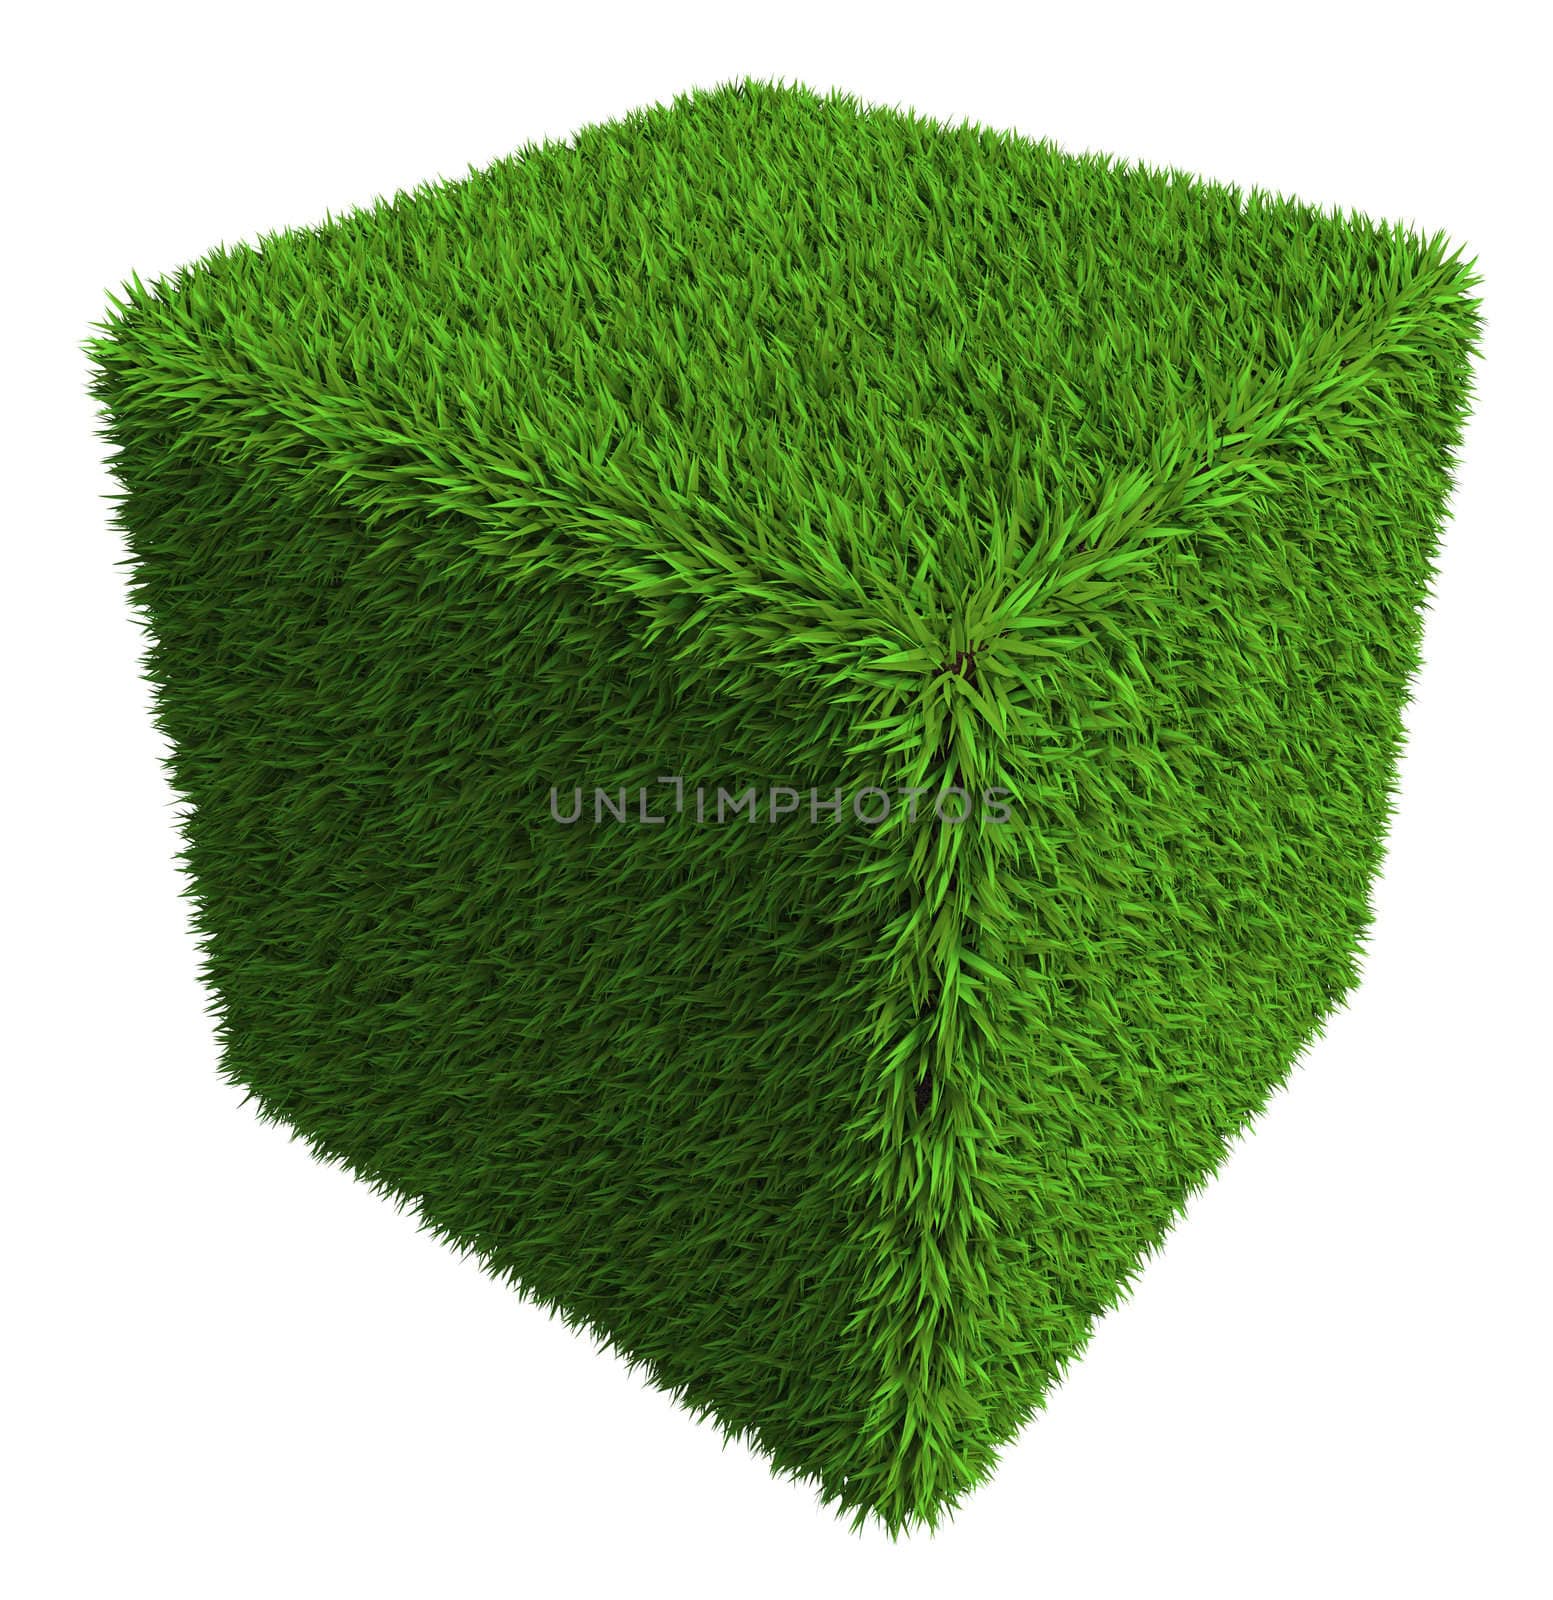 green grass cube isolated on white background. clipping path included